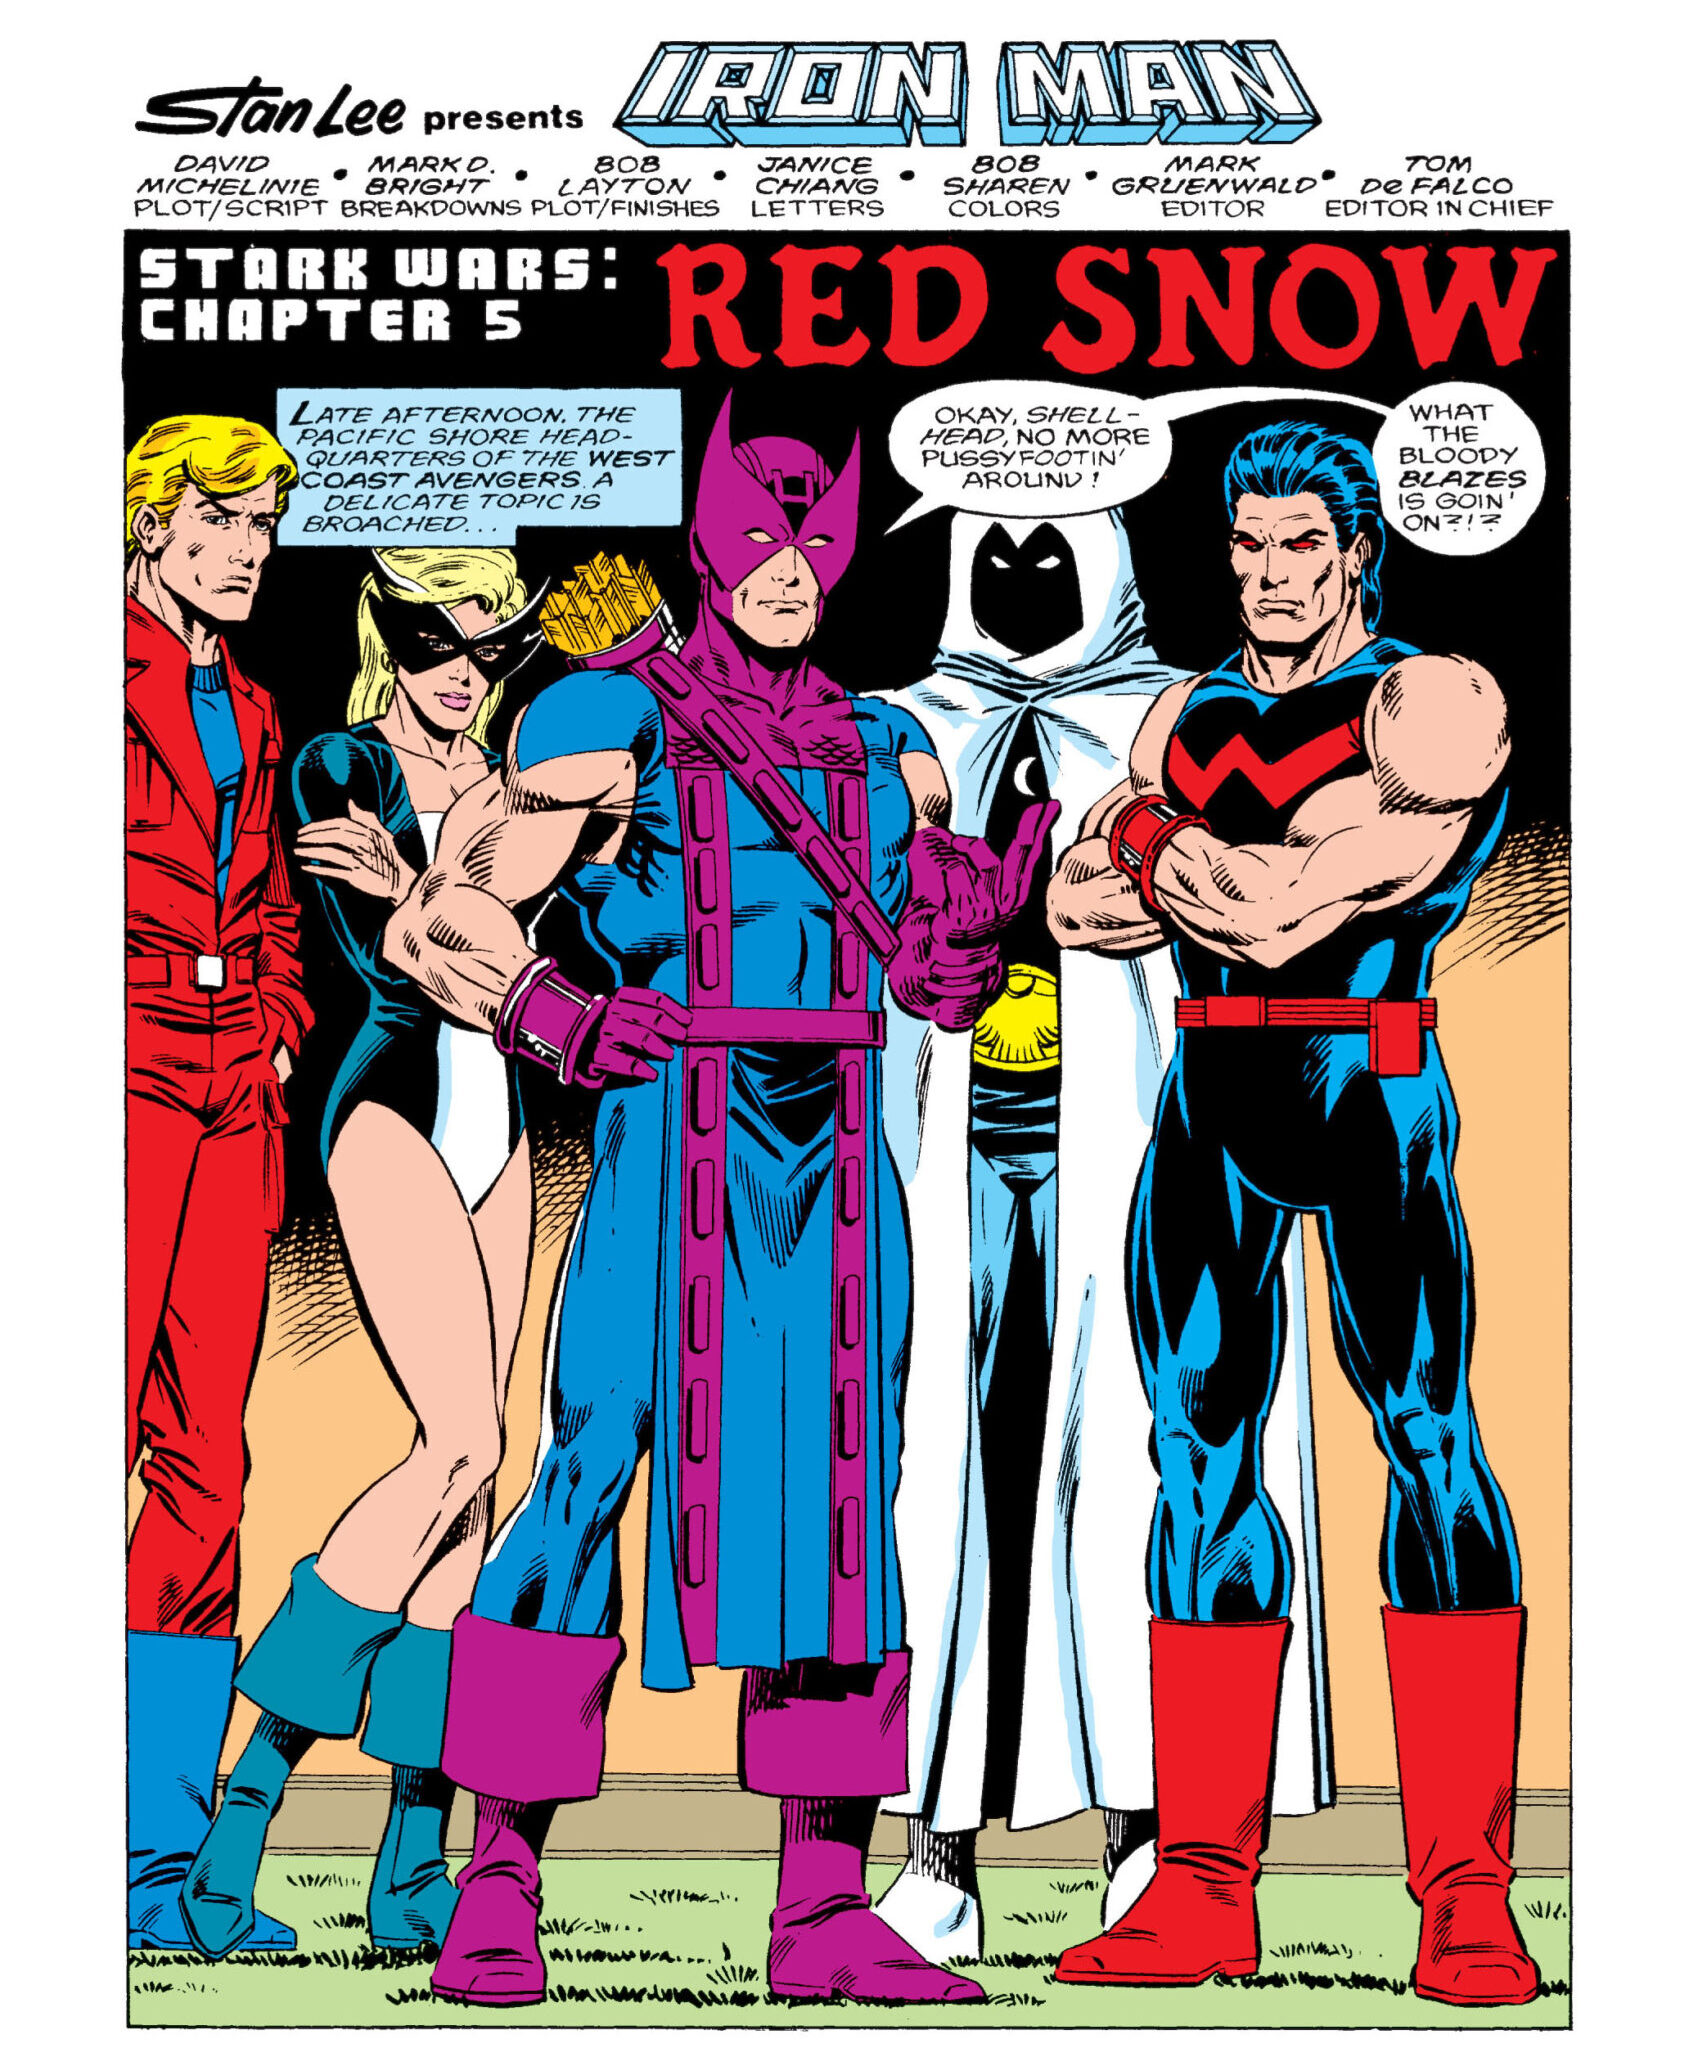 The Avengers have words with Tony Stark in Iron Man Vol. 1 #229 "Stark Wars, Chapter V: Red Snow" (1987), Marvel Comics. Words by David Michelinie, and Bob Layton, art by Mark Bright, Bob Layton, Bob Sharen, and Janice Chiang.